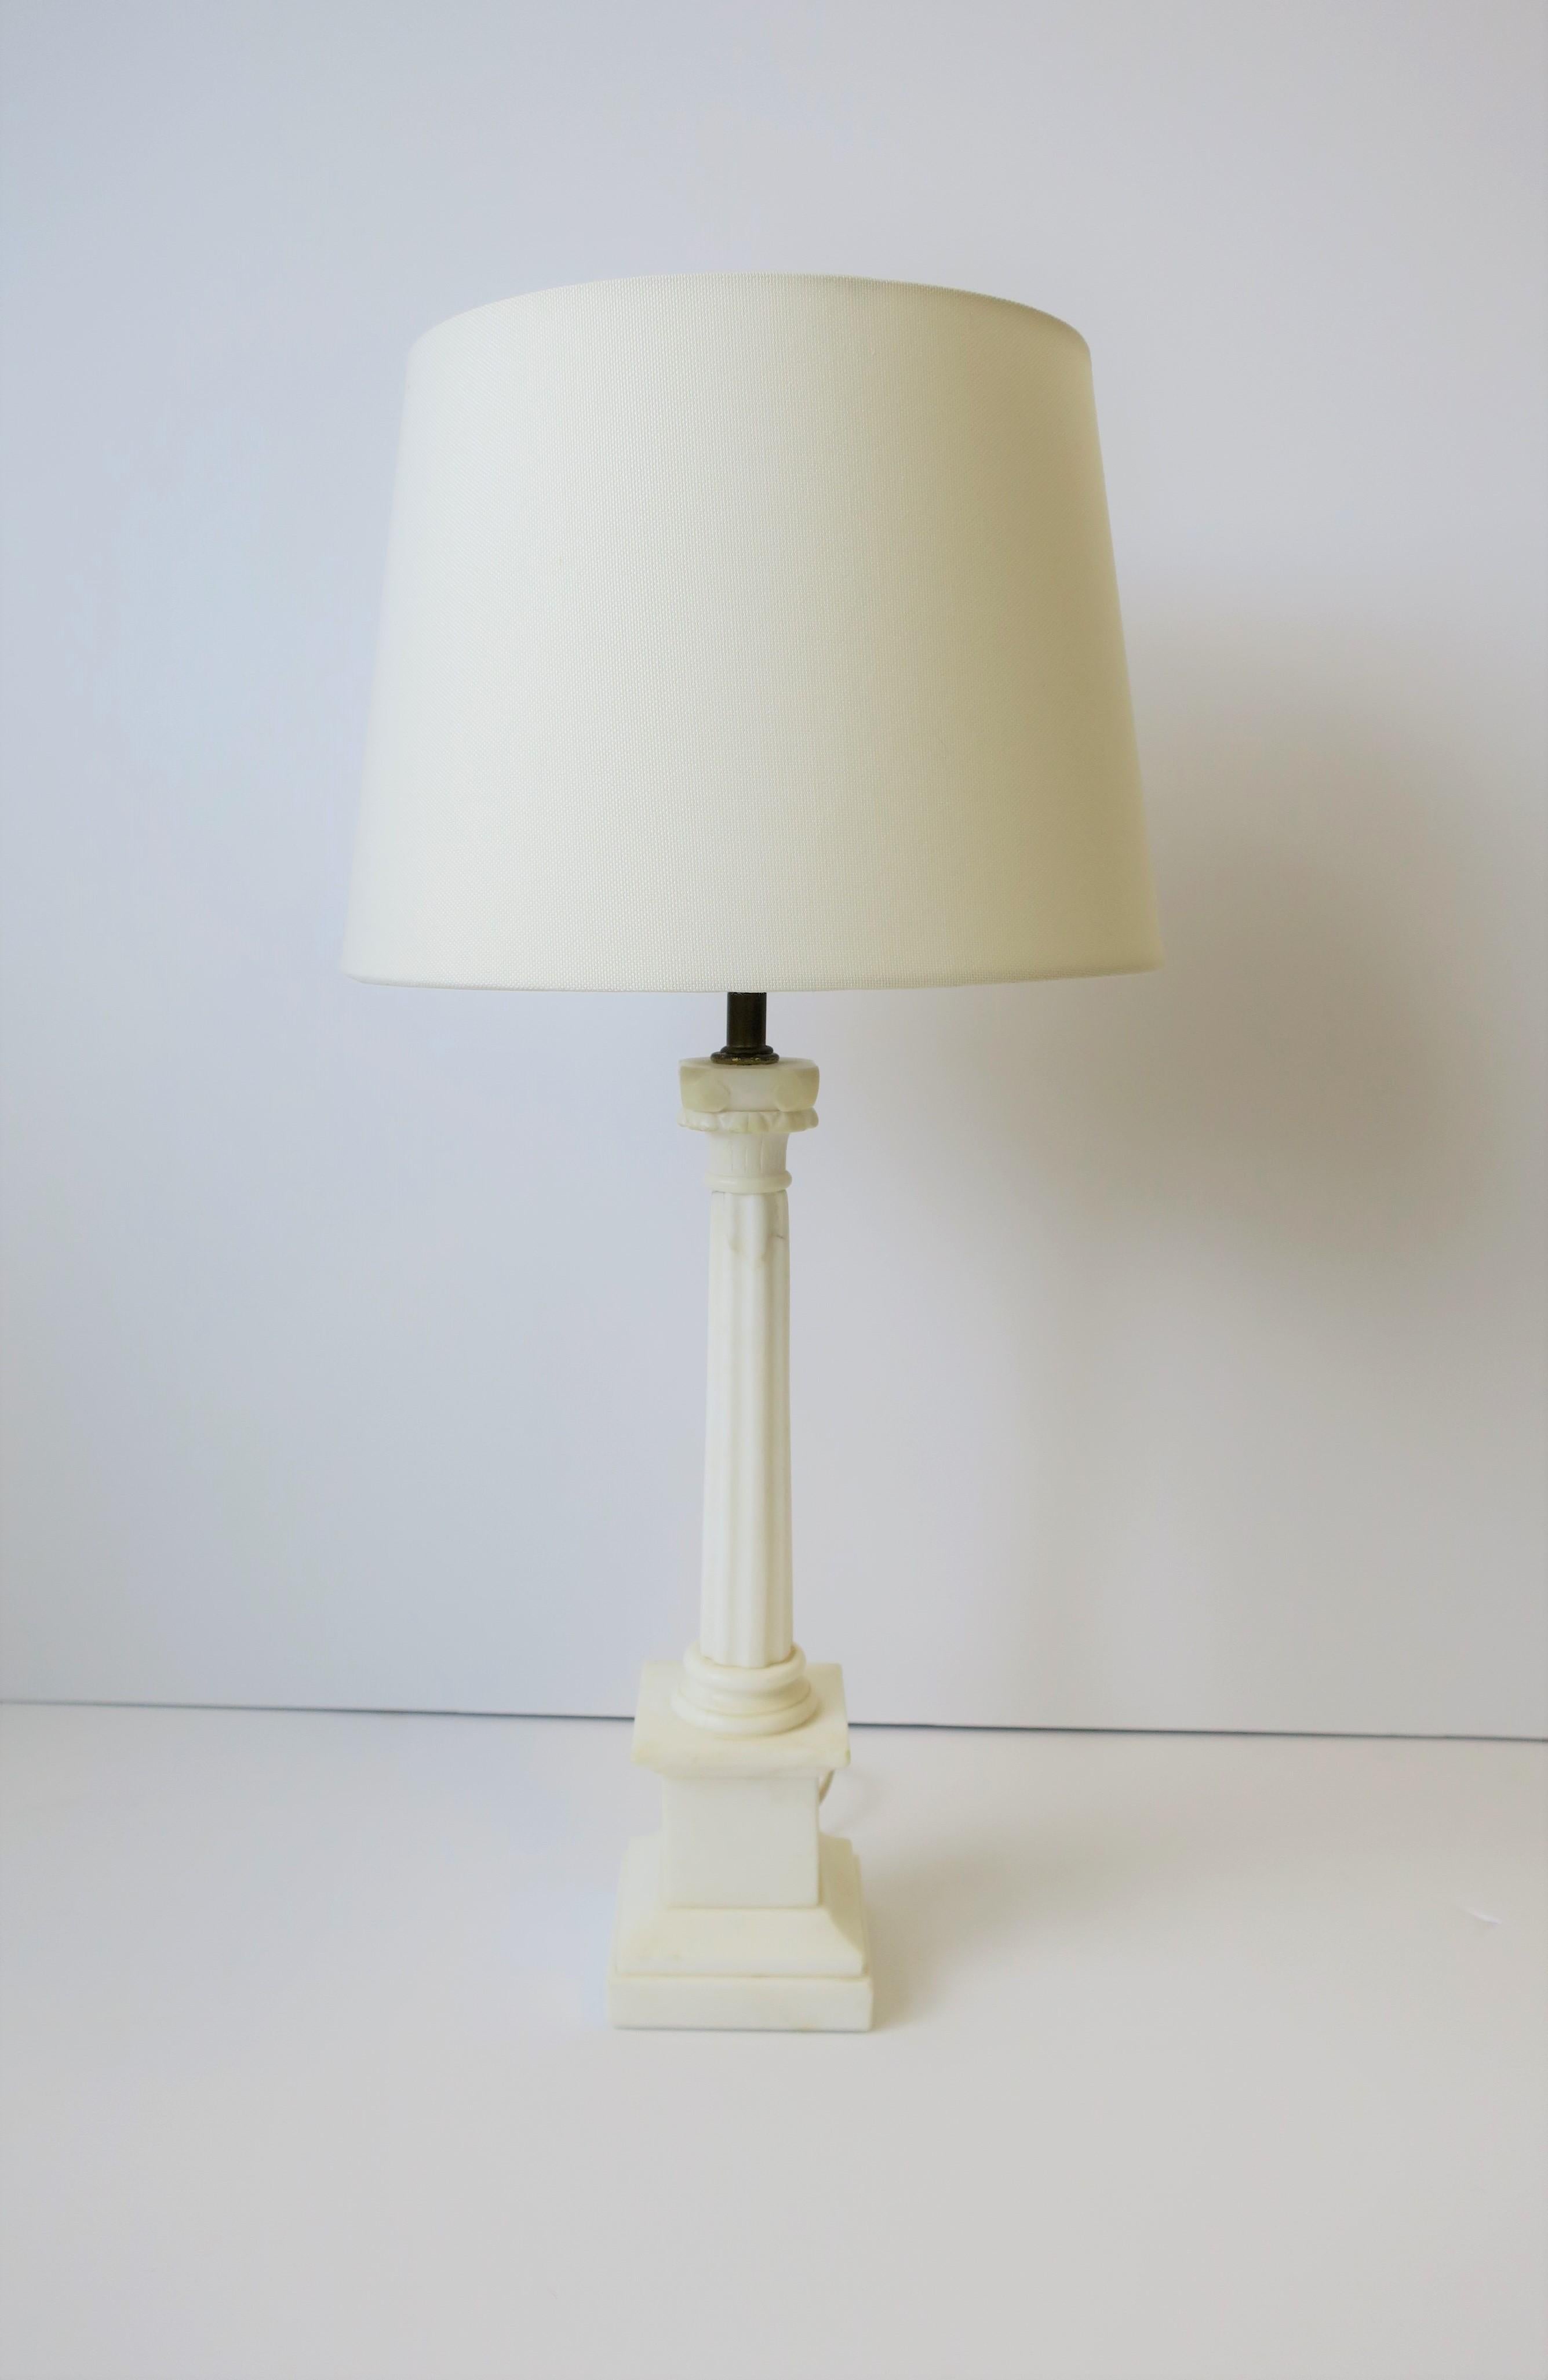 Italian White Marble Column Pillar Neoclassical Style Desk or Table Lamp In Good Condition For Sale In New York, NY